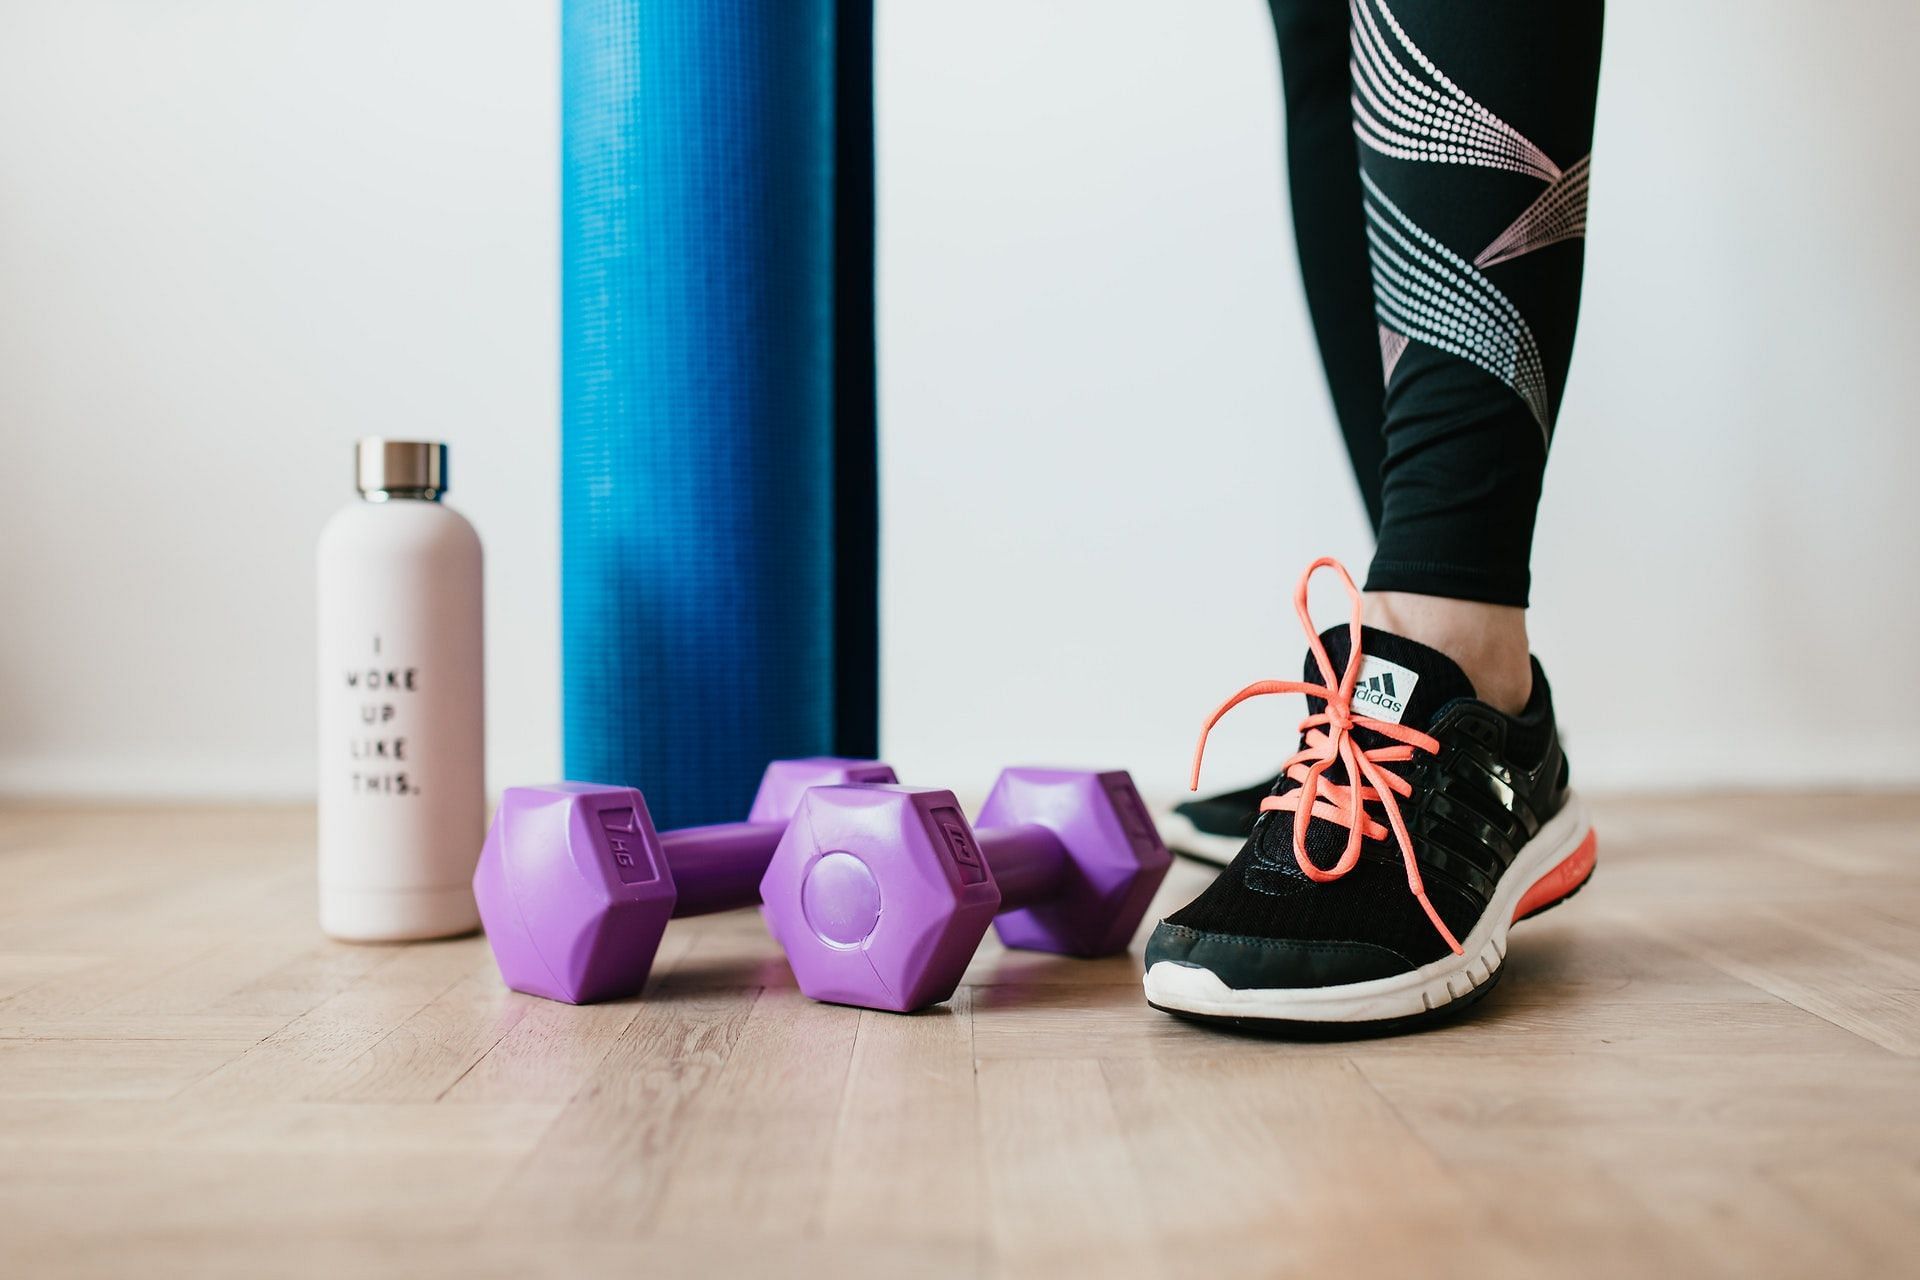 A leg abductor machine exercise can strengthen and tone your glutes. (Photo by Karolina Grabowska via pexels)